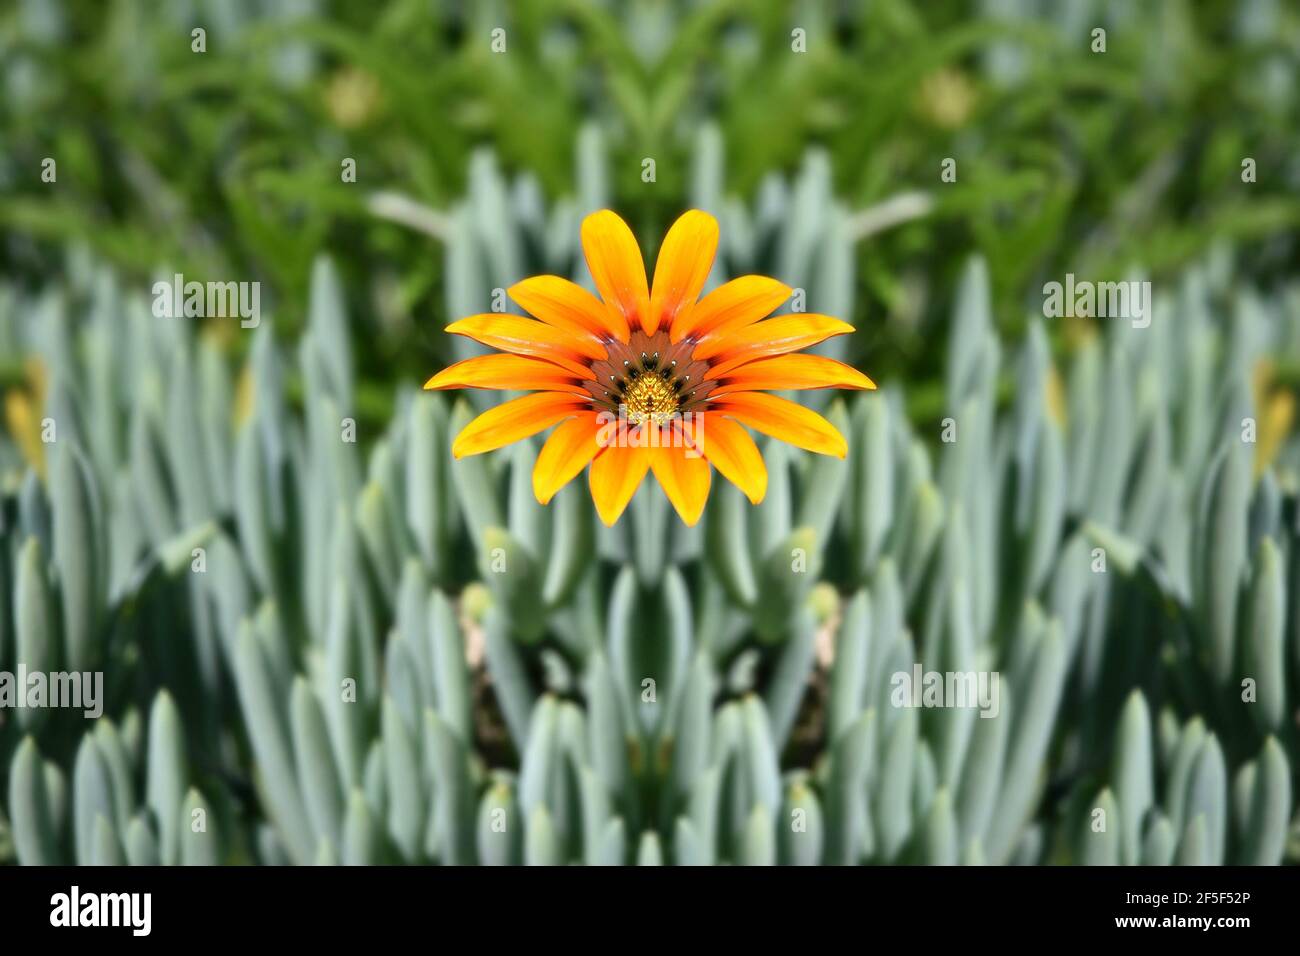 Gazania daisy with orange petals and maroon center on a natural green background. Stock Photo